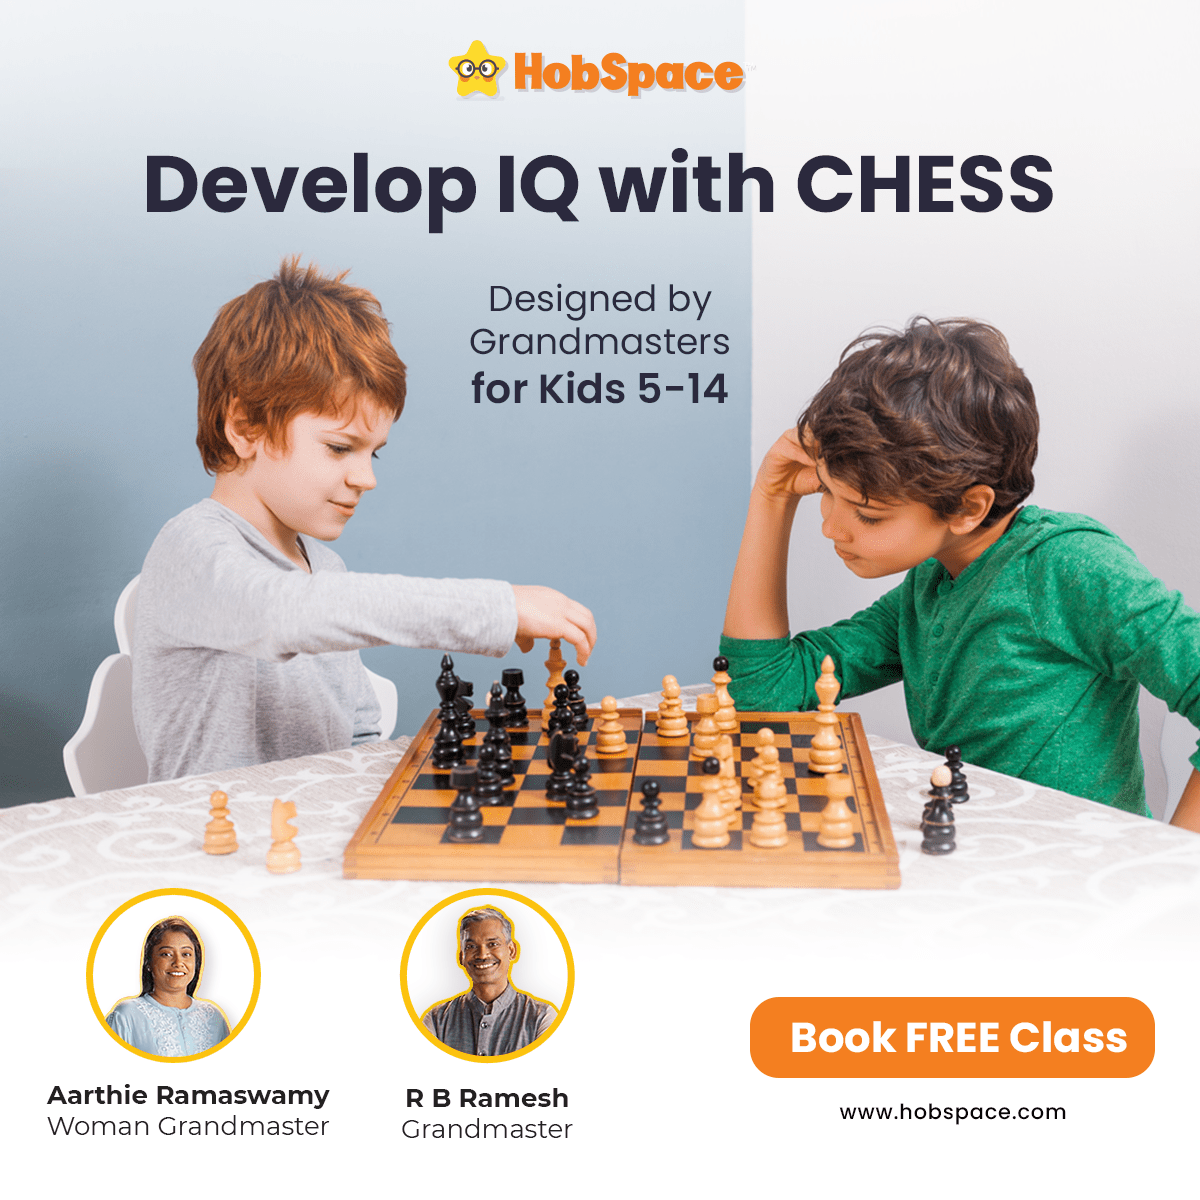 Online Chess Tournaments for Kids - HobSpace - Chess Blog